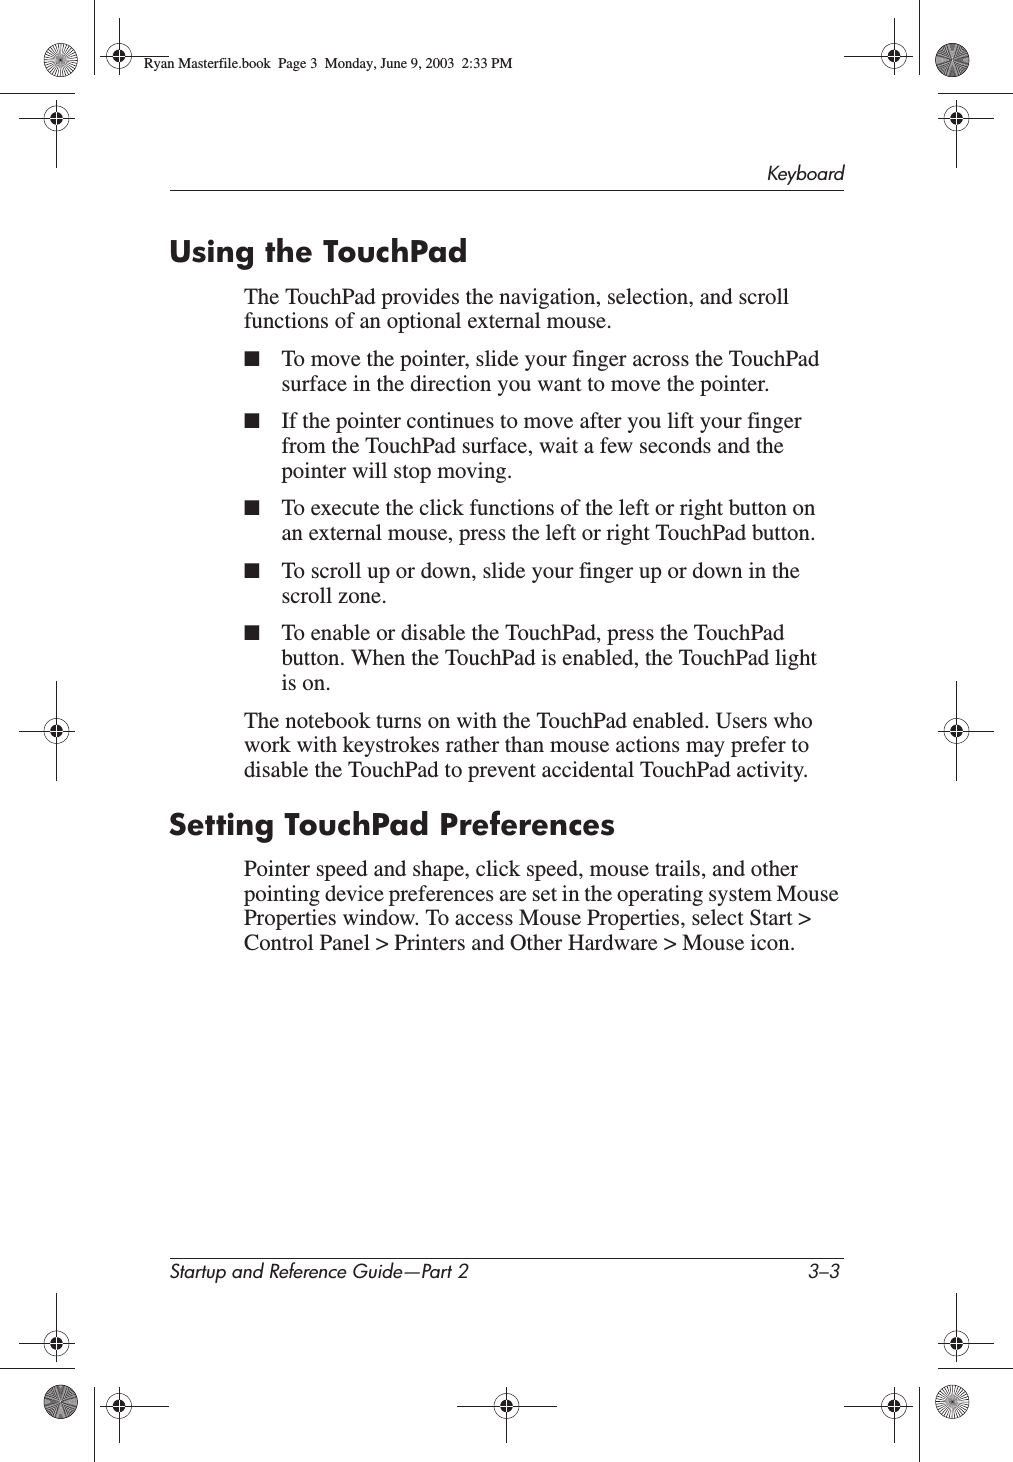 KeyboardStartup and Reference Guide—Part 2 3–3Using the TouchPadThe TouchPad provides the navigation, selection, and scroll functions of an optional external mouse.■To move the pointer, slide your finger across the TouchPad surface in the direction you want to move the pointer.■If the pointer continues to move after you lift your finger from the TouchPad surface, wait a few seconds and the pointer will stop moving.■To execute the click functions of the left or right button on an external mouse, press the left or right TouchPad button.■To scroll up or down, slide your finger up or down in the scroll zone.■To enable or disable the TouchPad, press the TouchPad button. When the TouchPad is enabled, the TouchPad light is on.The notebook turns on with the TouchPad enabled. Users who work with keystrokes rather than mouse actions may prefer to disable the TouchPad to prevent accidental TouchPad activity.Setting TouchPad PreferencesPointer speed and shape, click speed, mouse trails, and other pointing device preferences are set in the operating system Mouse Properties window. To access Mouse Properties, select Start &gt; Control Panel &gt; Printers and Other Hardware &gt; Mouse icon.Ryan Masterfile.book  Page 3  Monday, June 9, 2003  2:33 PM